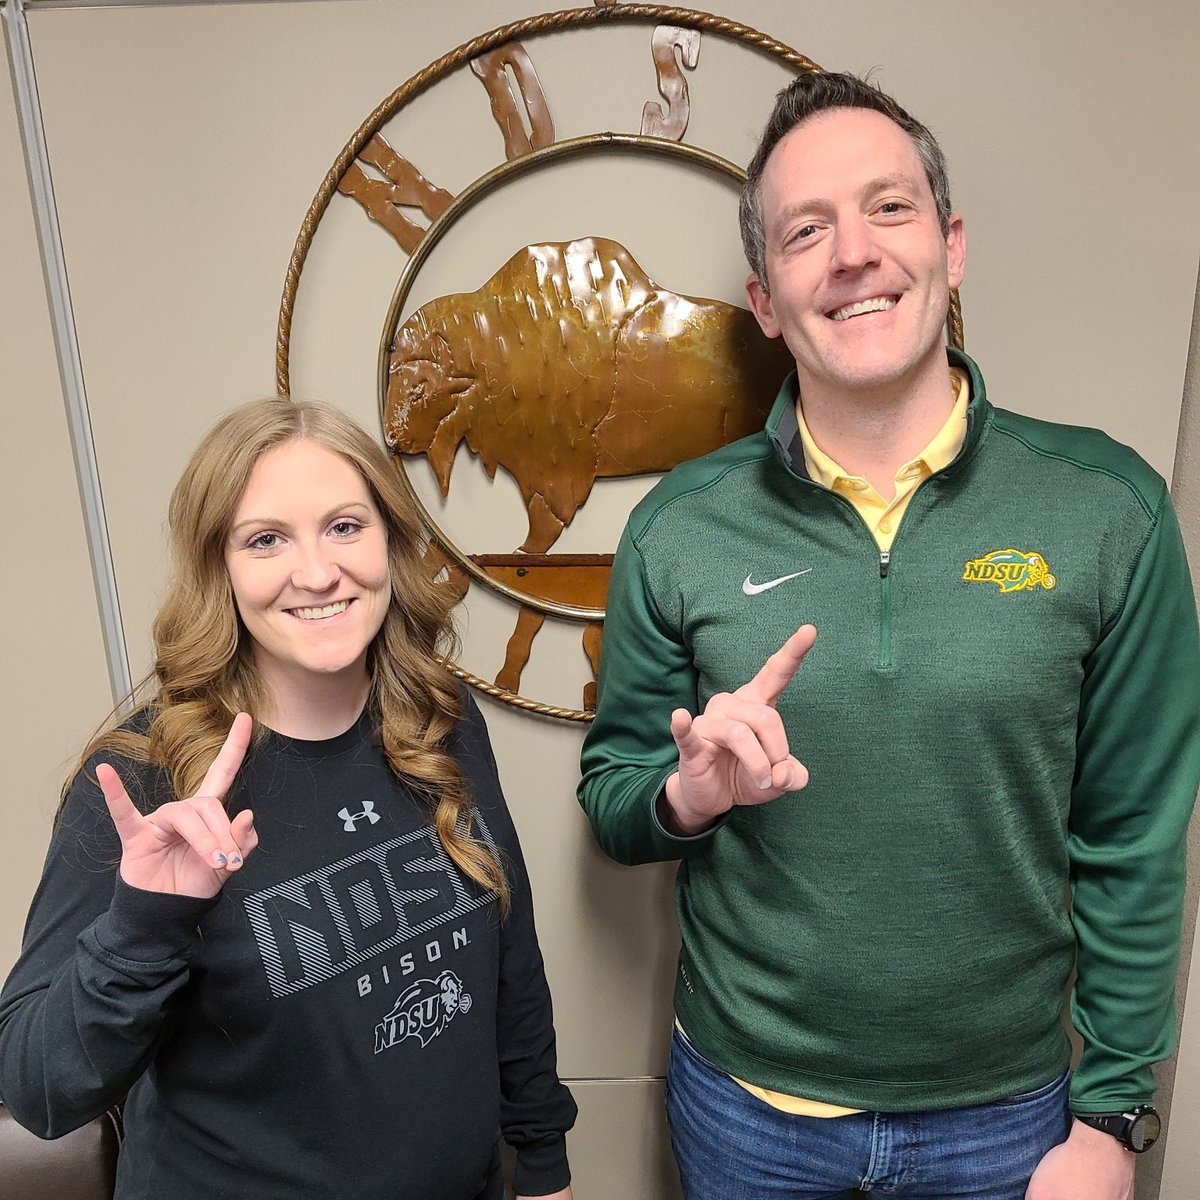 We're wishing NDSU the best of luck as they battle SDSU for the FCS Championship on Sunday! Go Bison 🤘

#youcanbankonus #fcschampionship #bisonnation